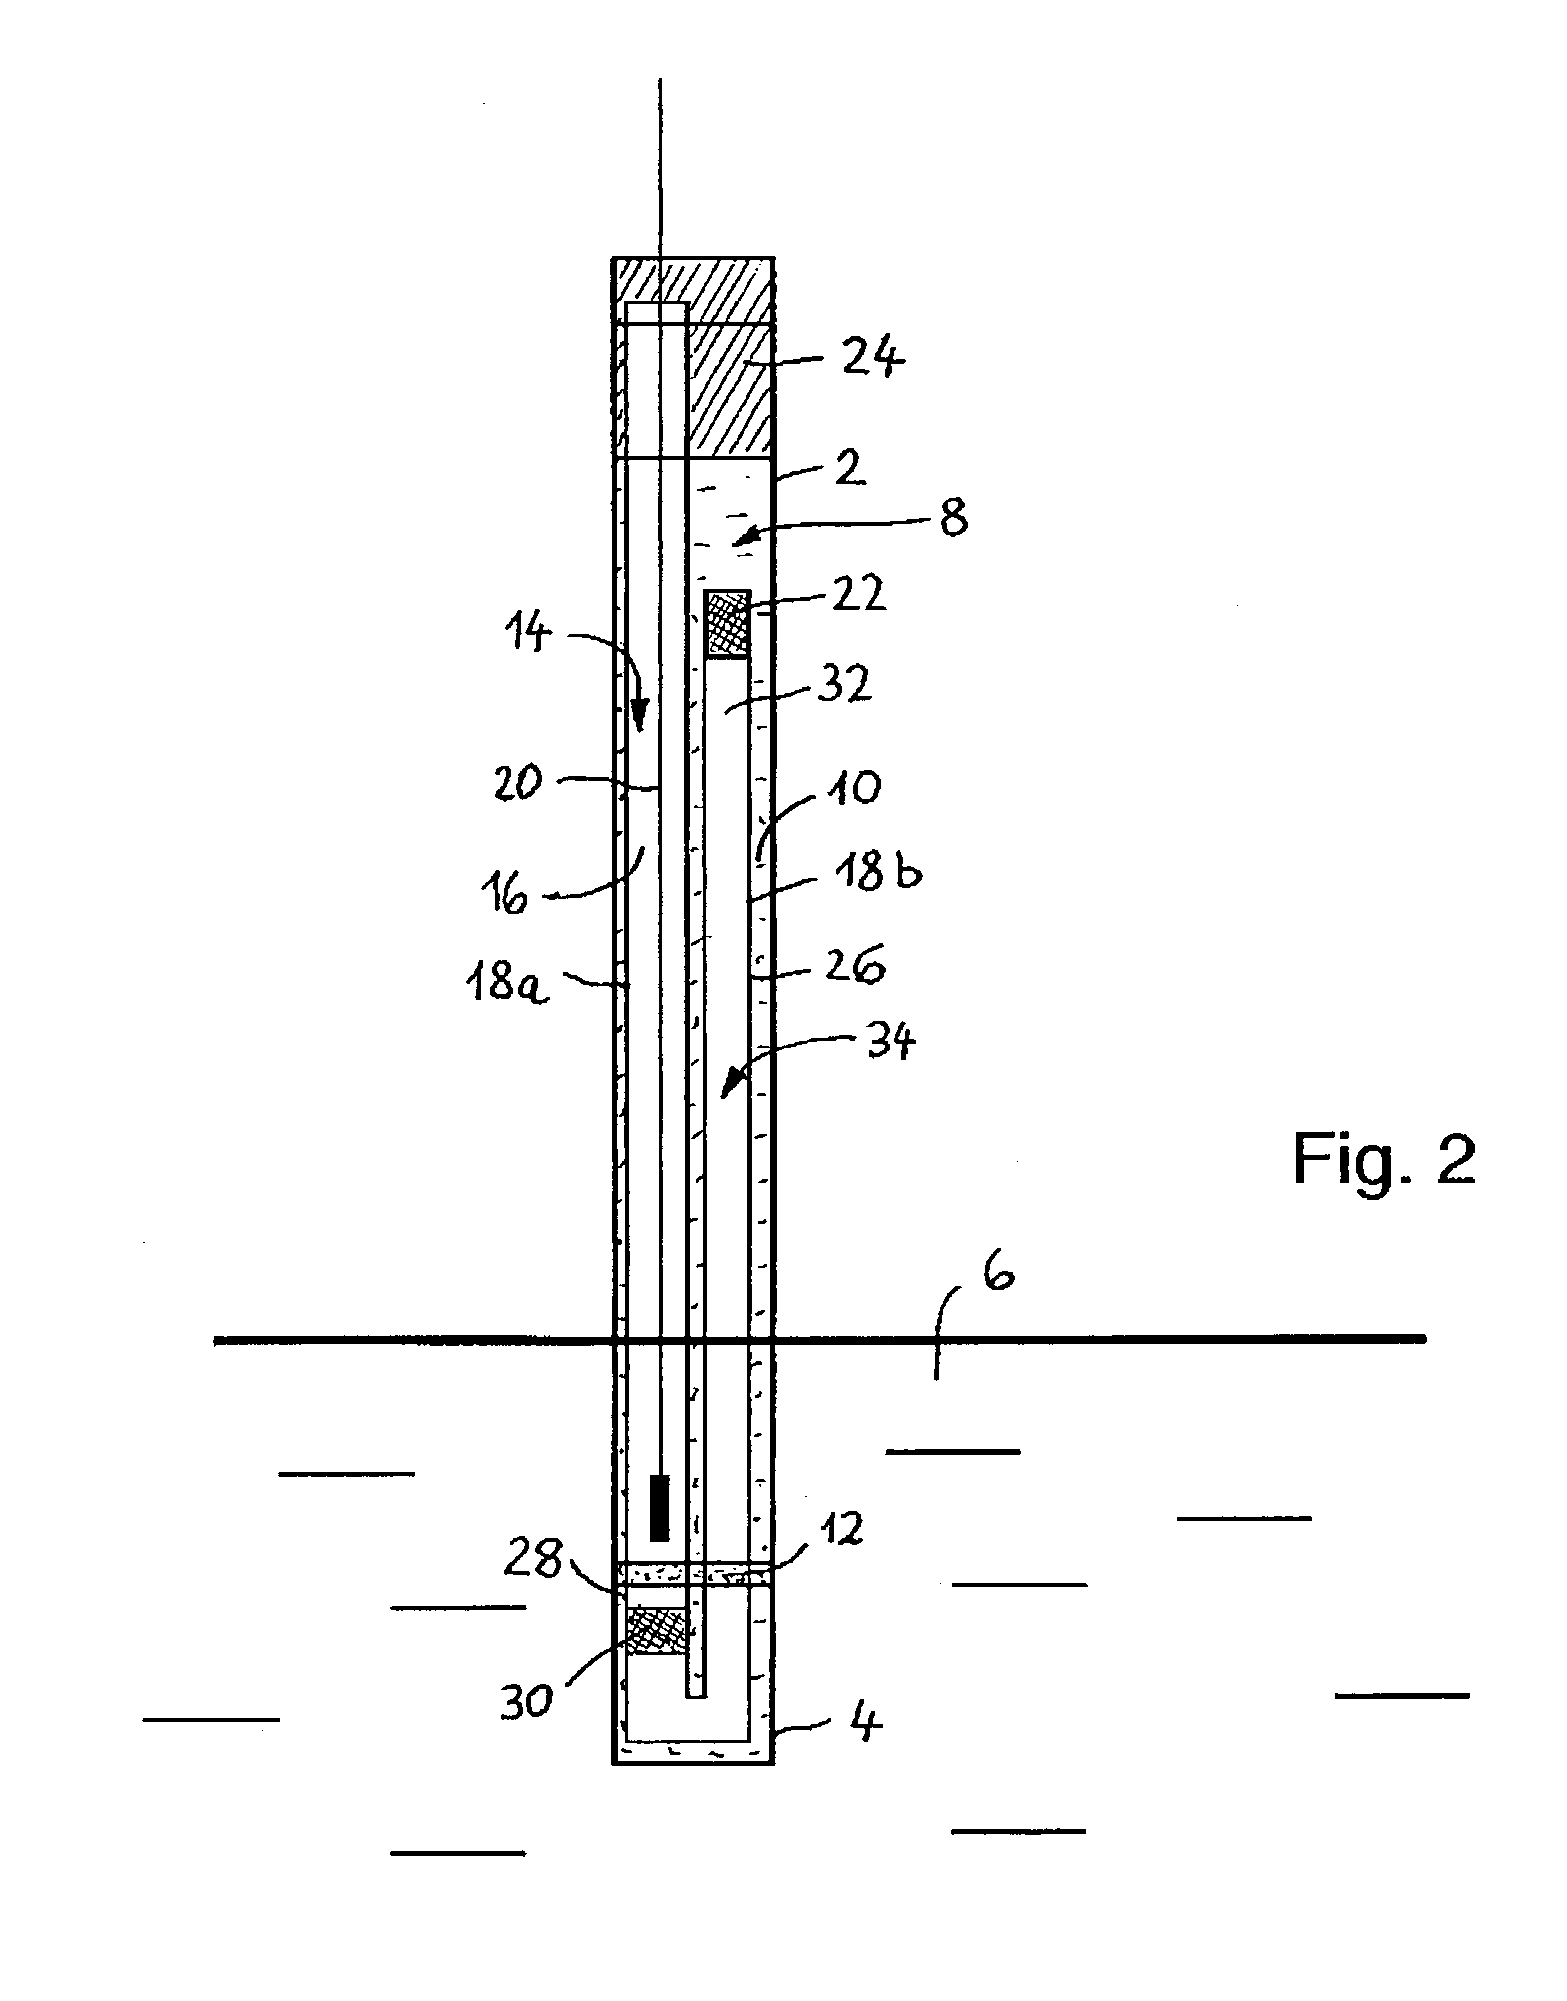 Pressure-resistant reference electrode for electrochemical measurements